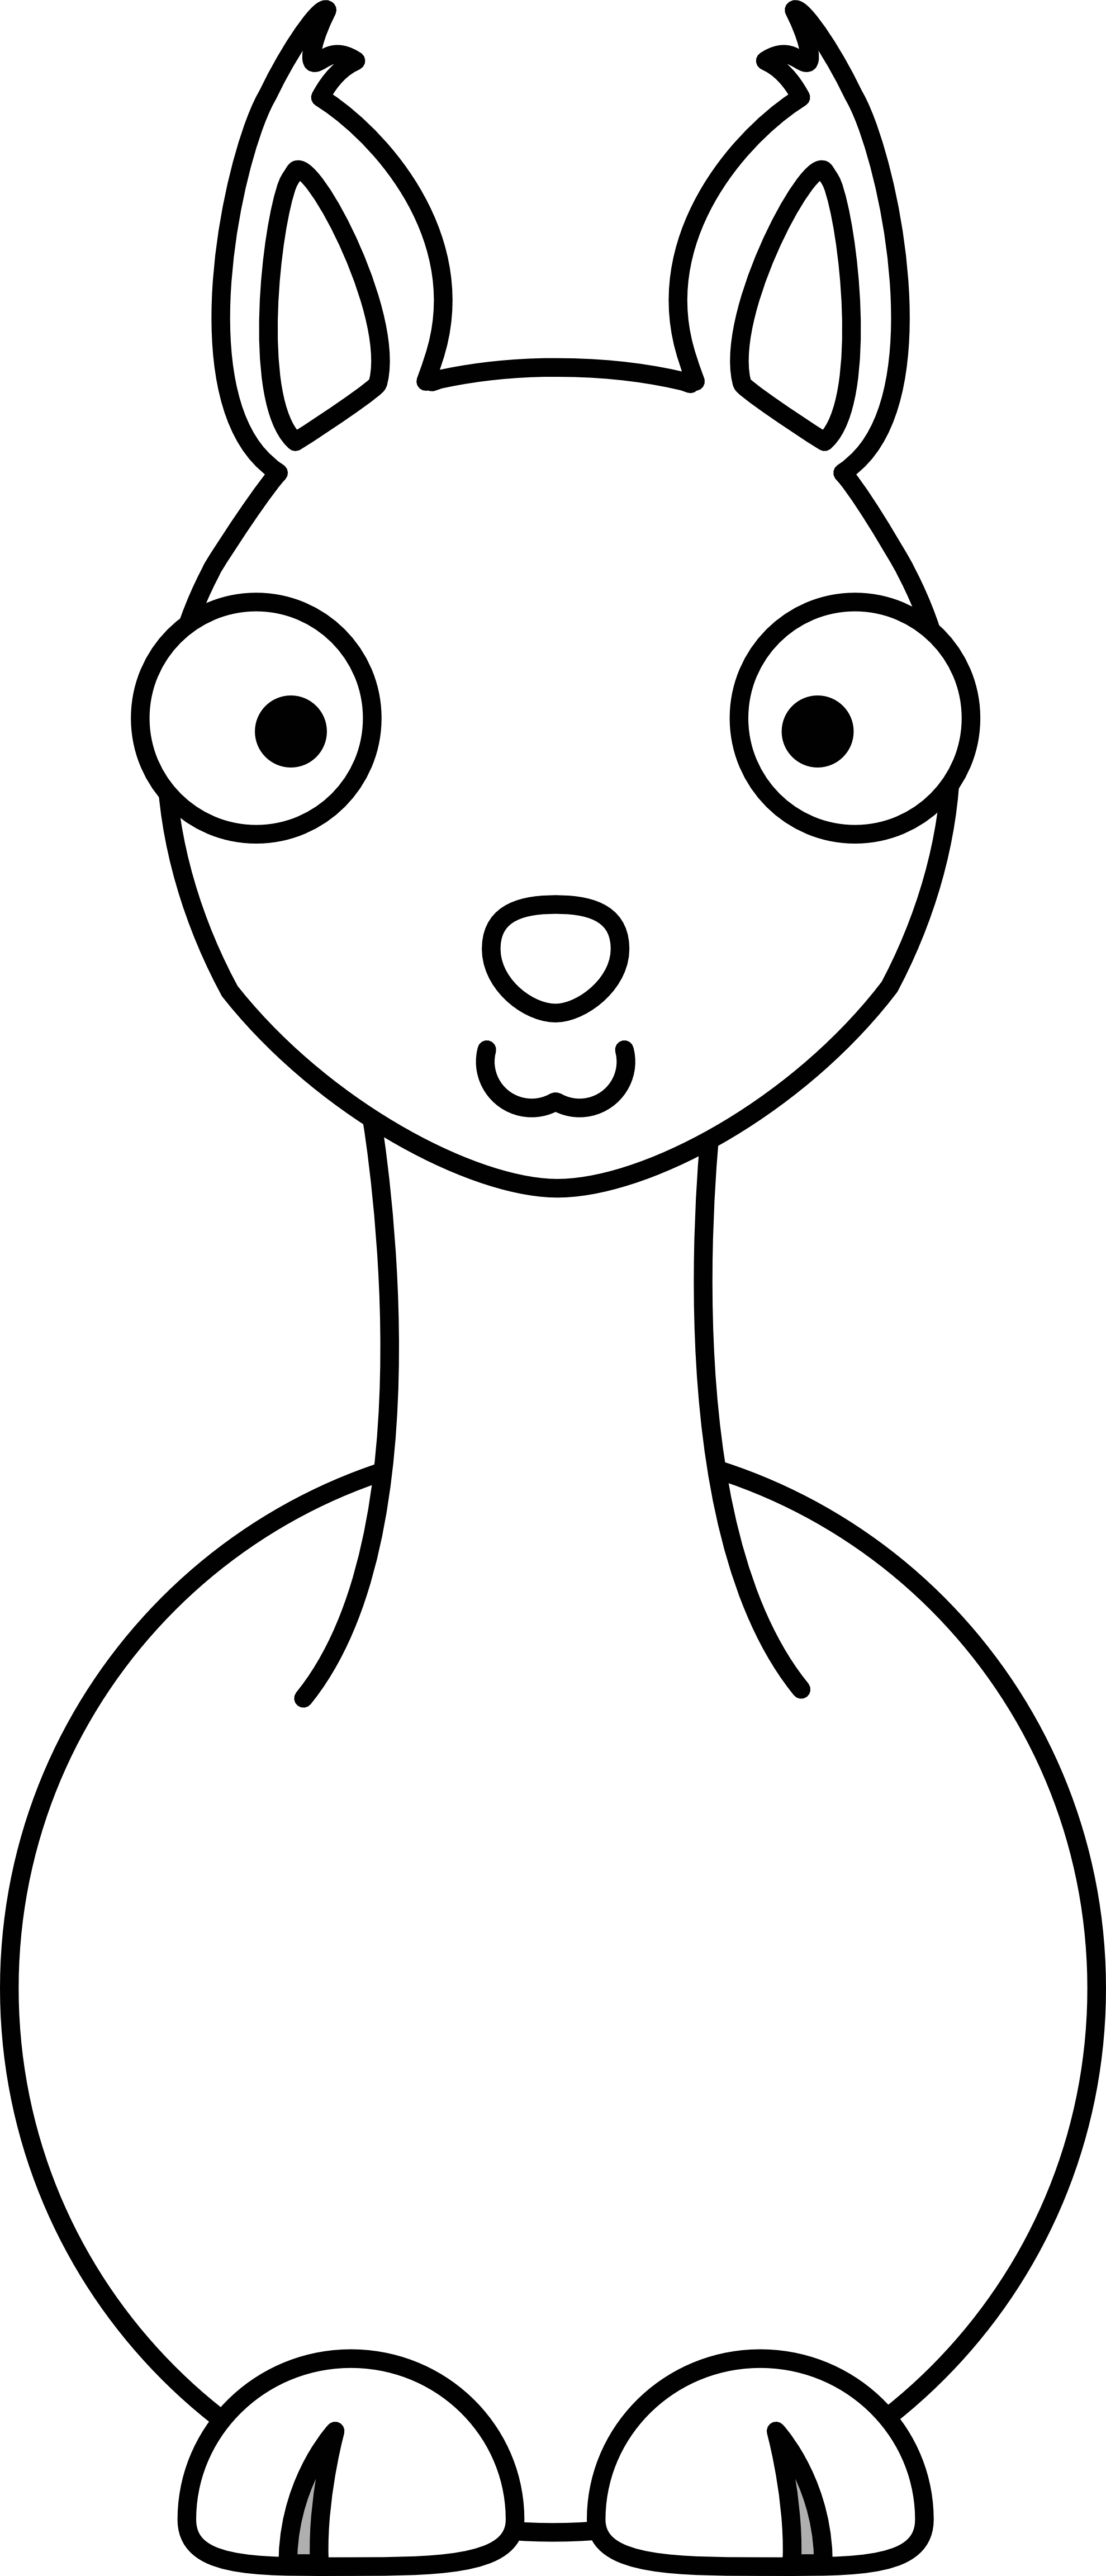 nose clipart colouring